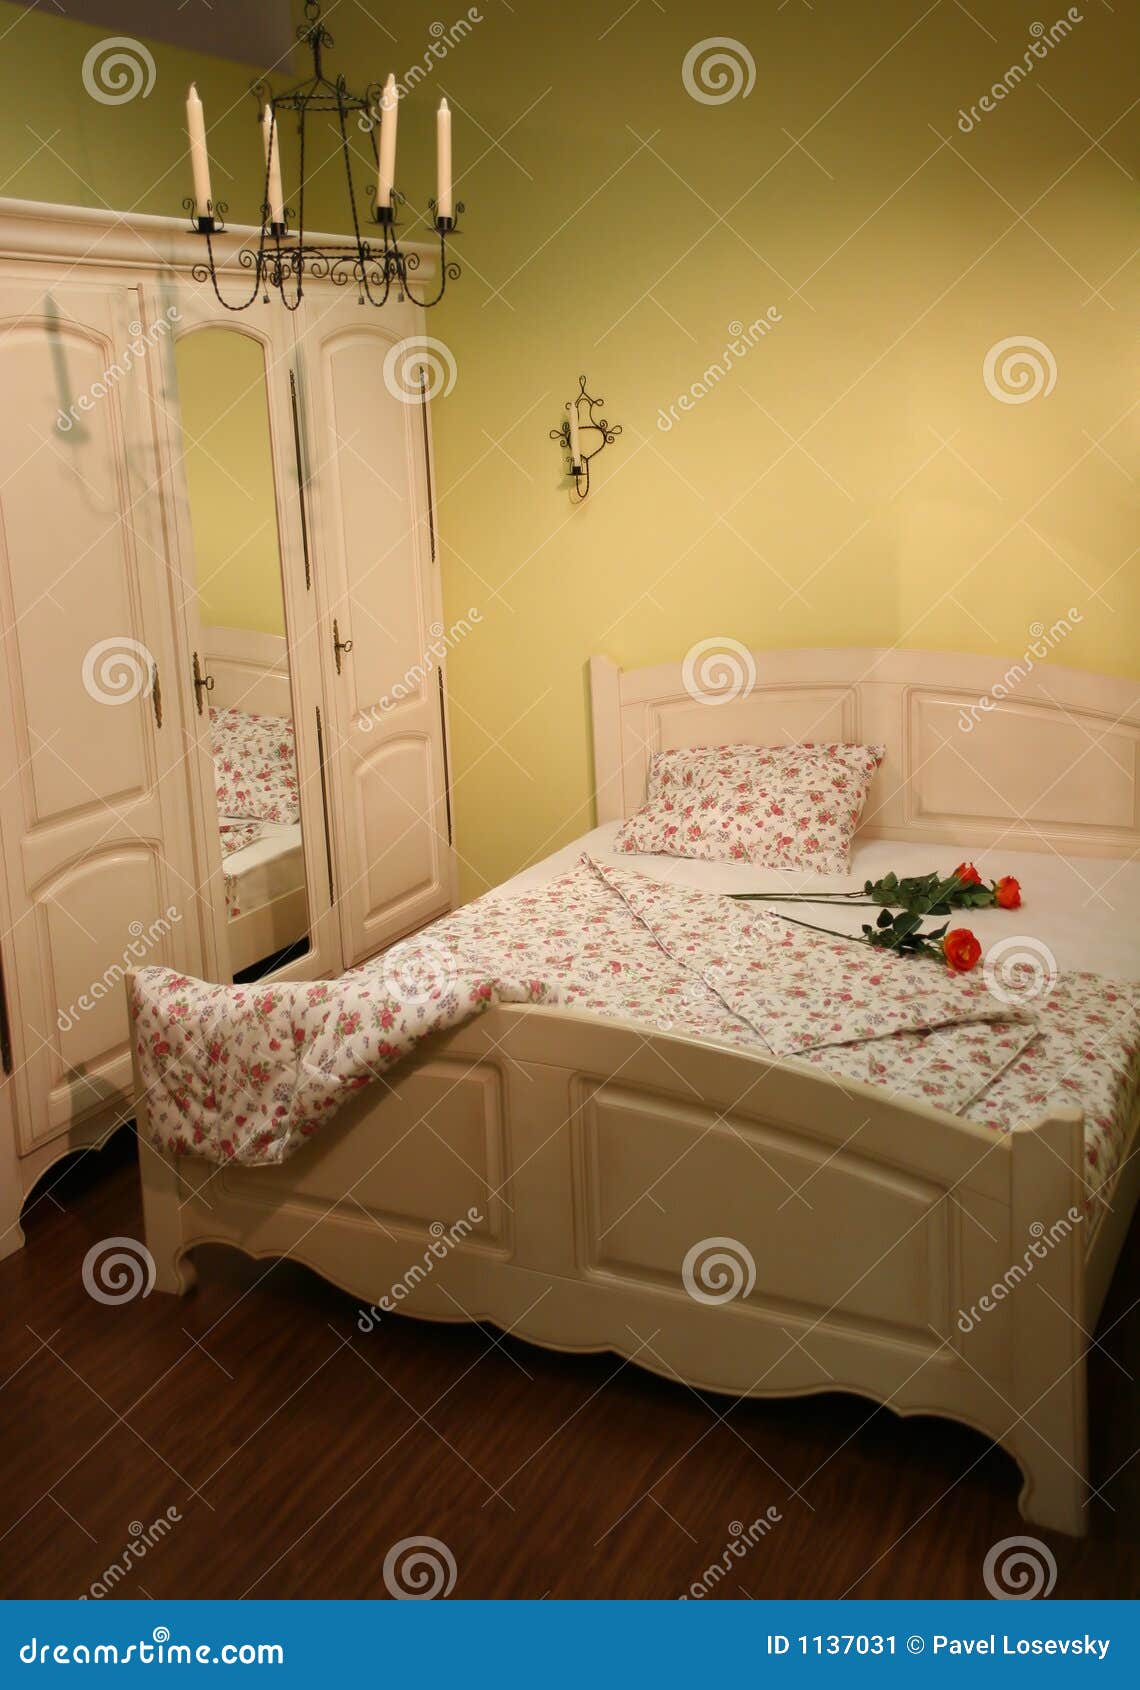 Cream Bedroom With Roses Stock Image Image Of Coverlet